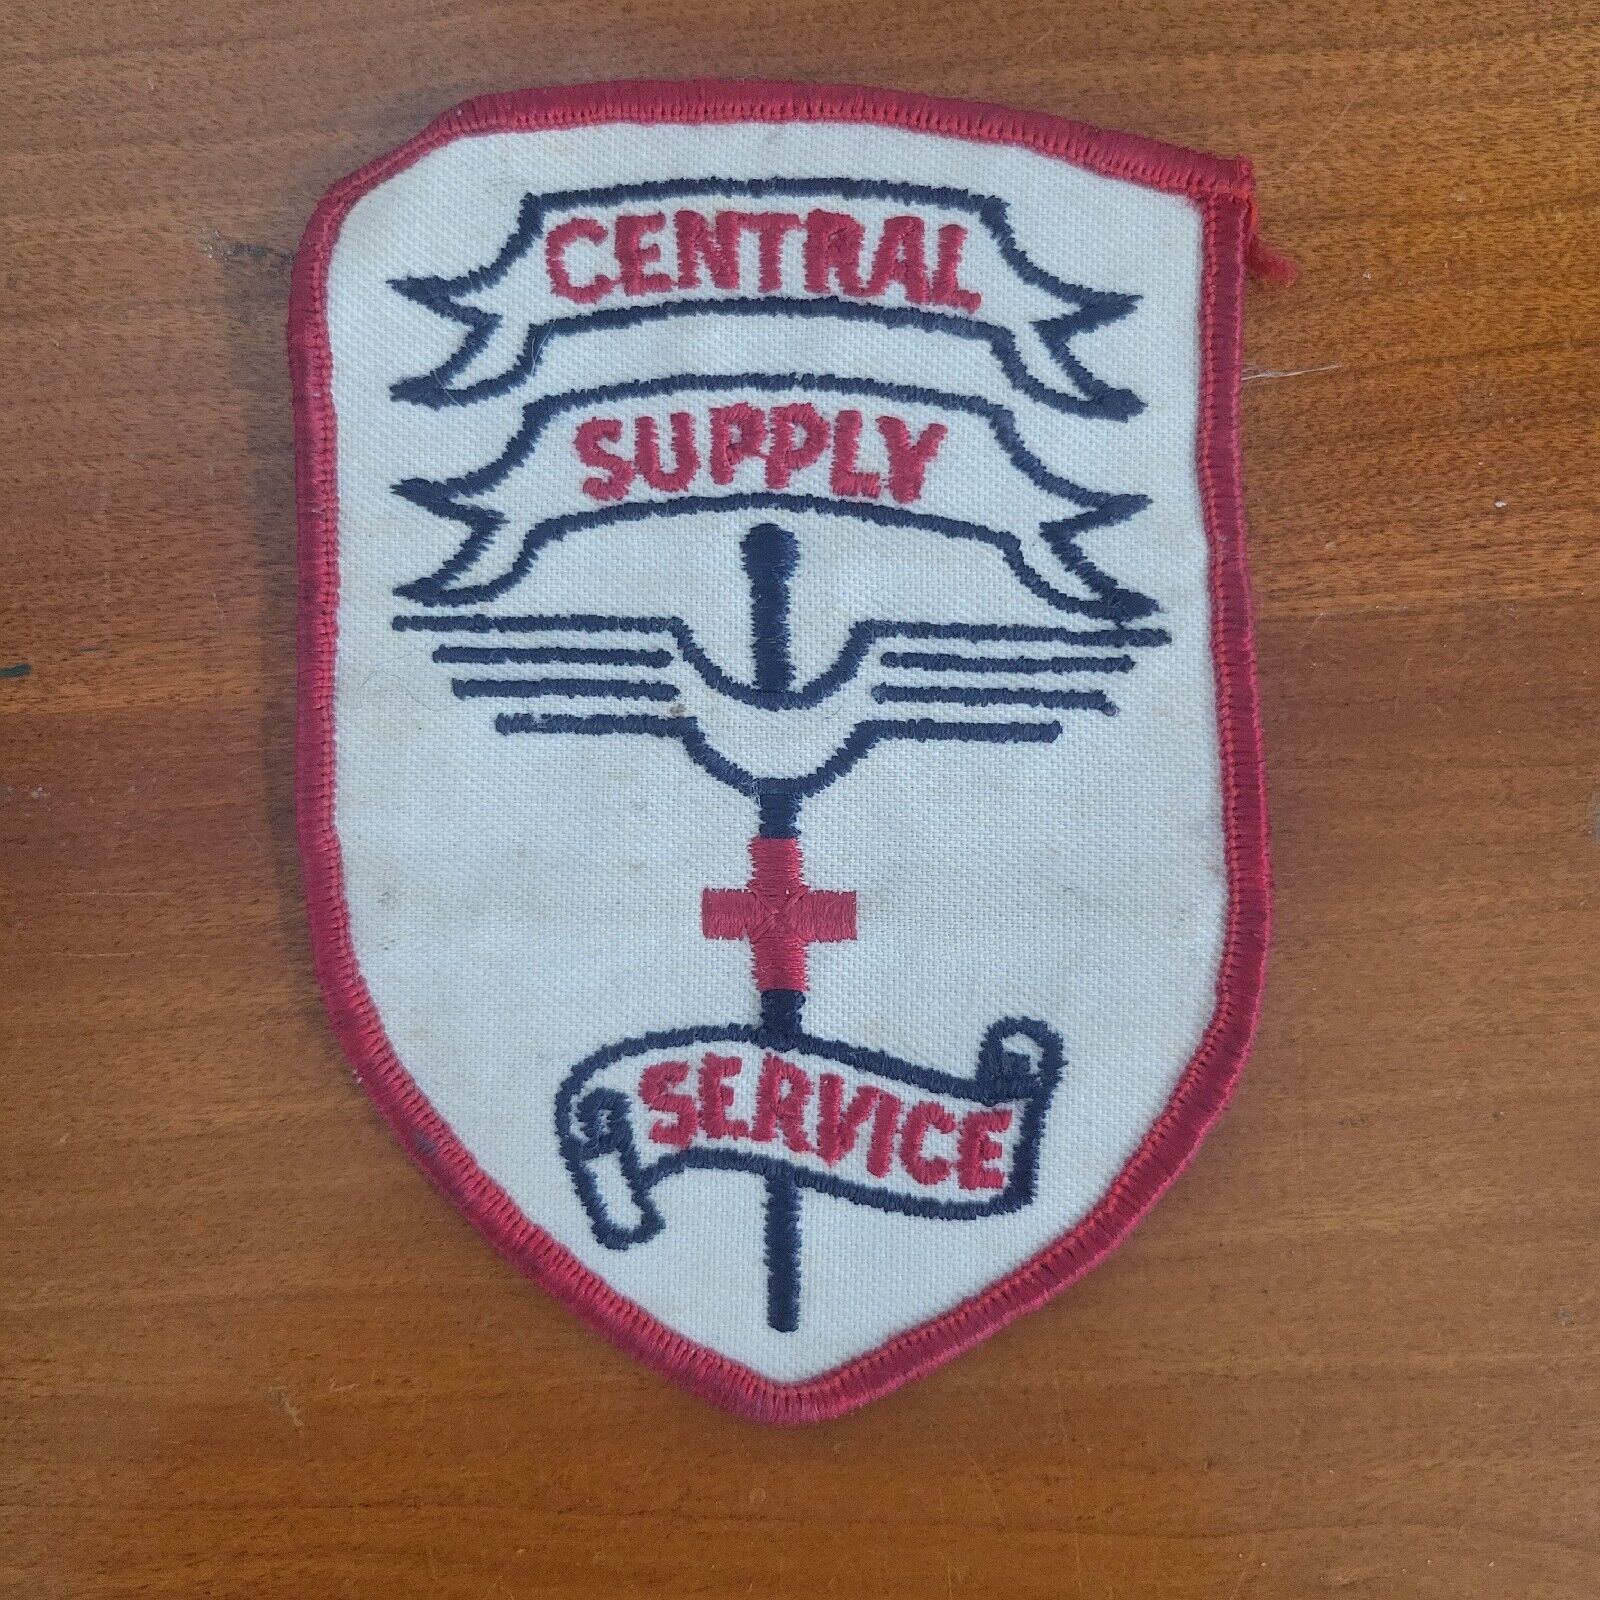 Central Supply Service Patch